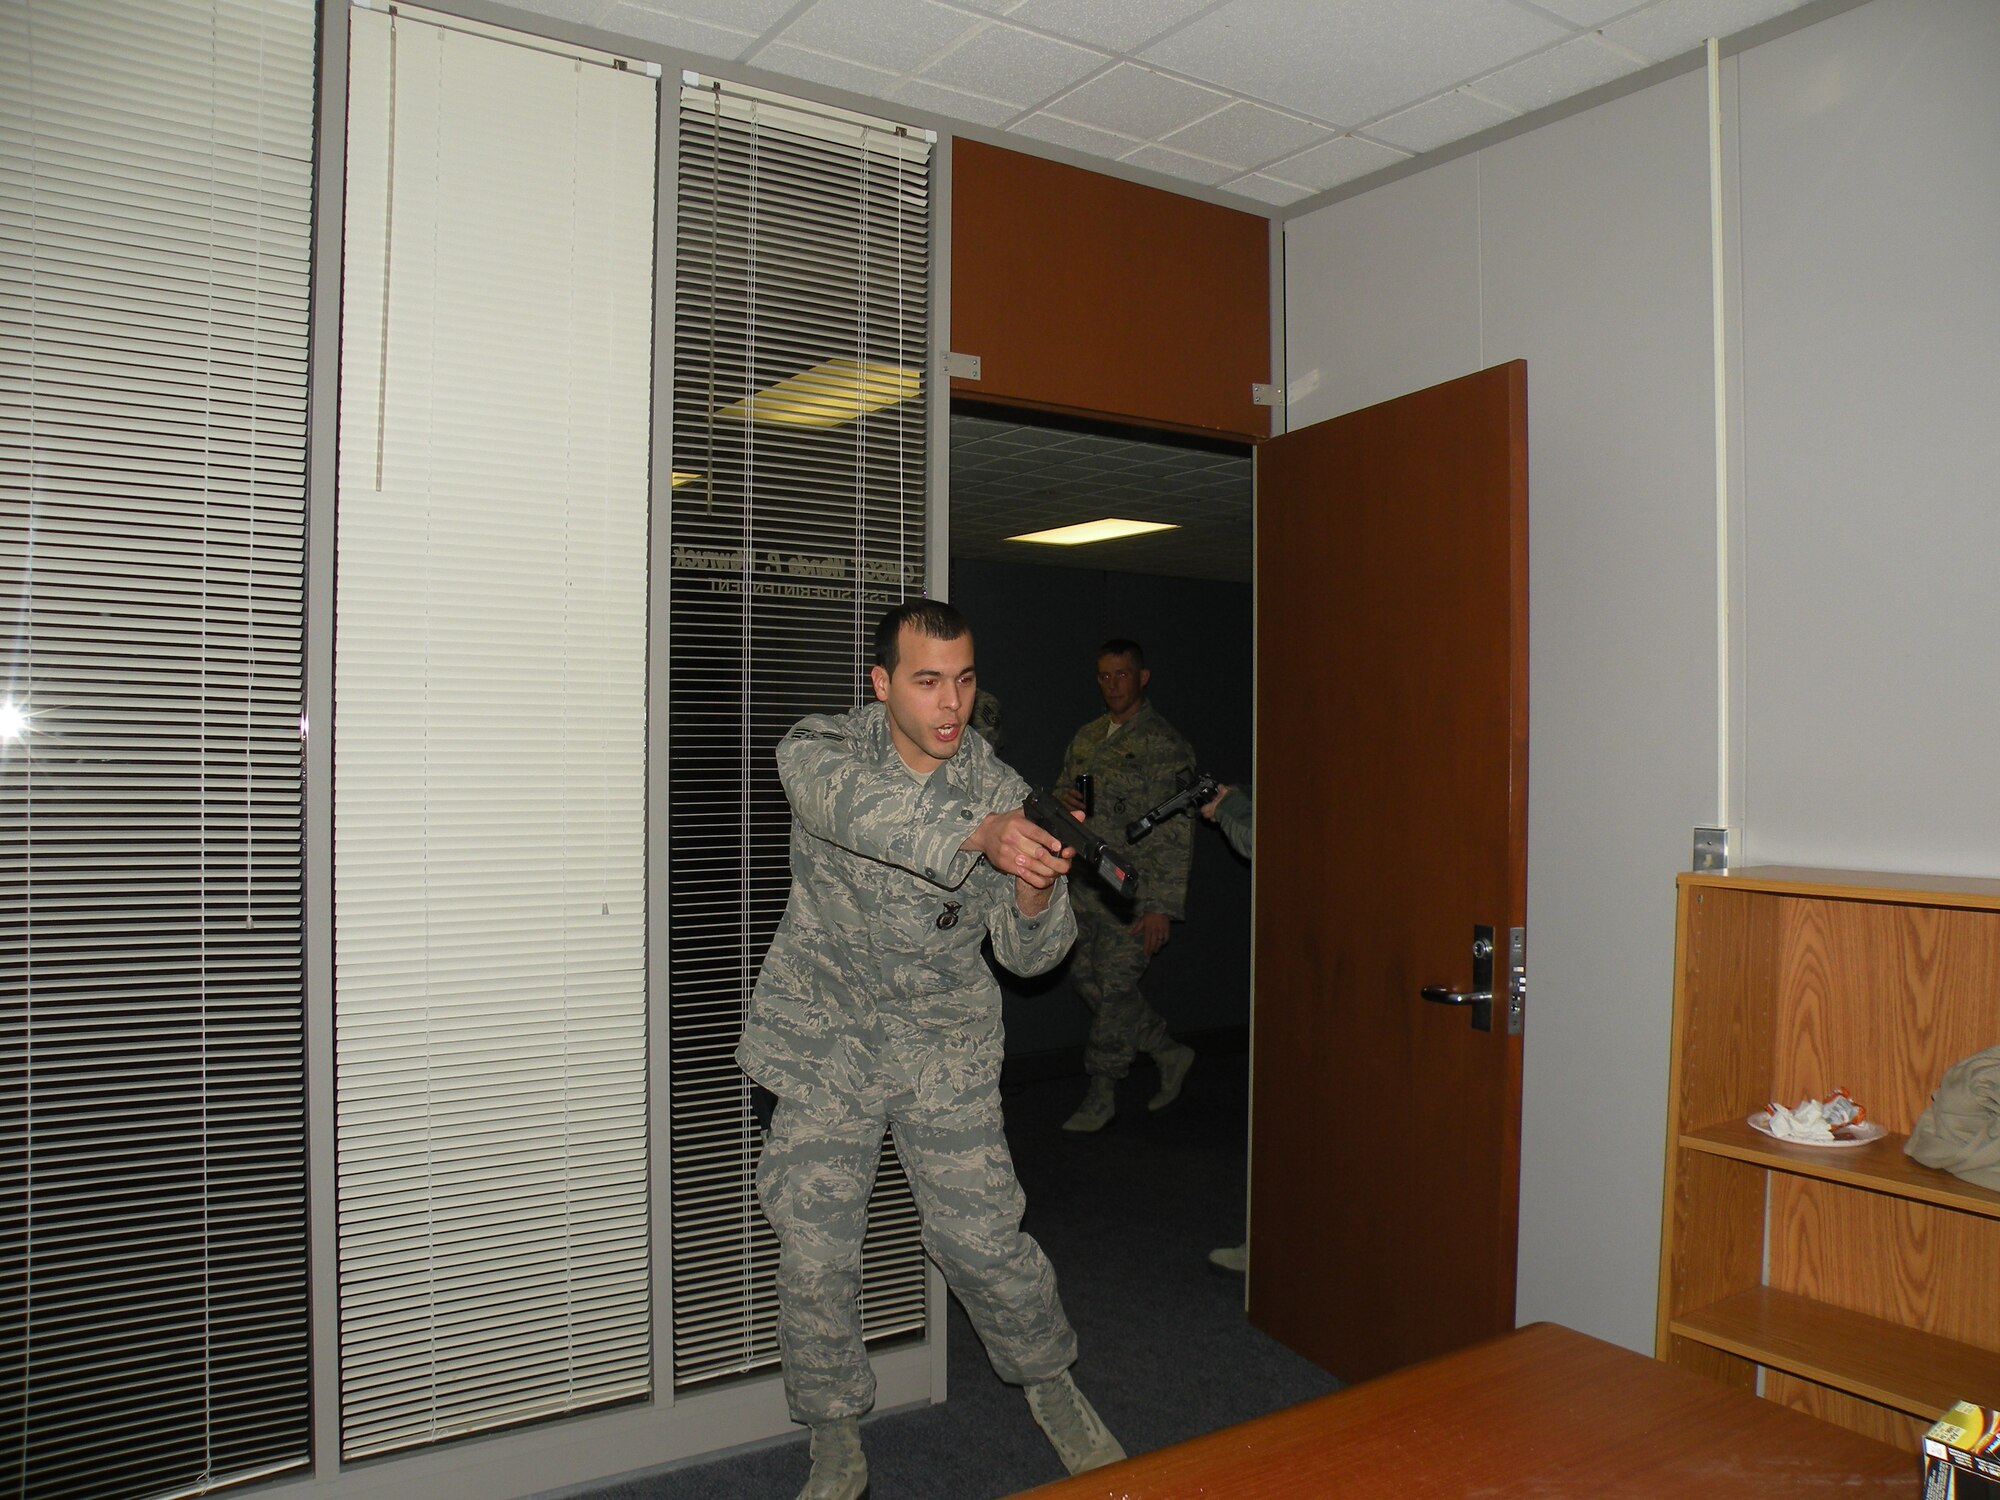 Airman 1st Class Matthew Rosado, 103rd Security Forces Squadron, confronts a hostile person as part of a training exercise at Bradley Air National Guard Base, East Granby, Conn. in 2013. (Photos courtesy of Tech. Sgt. Jessica Roy)